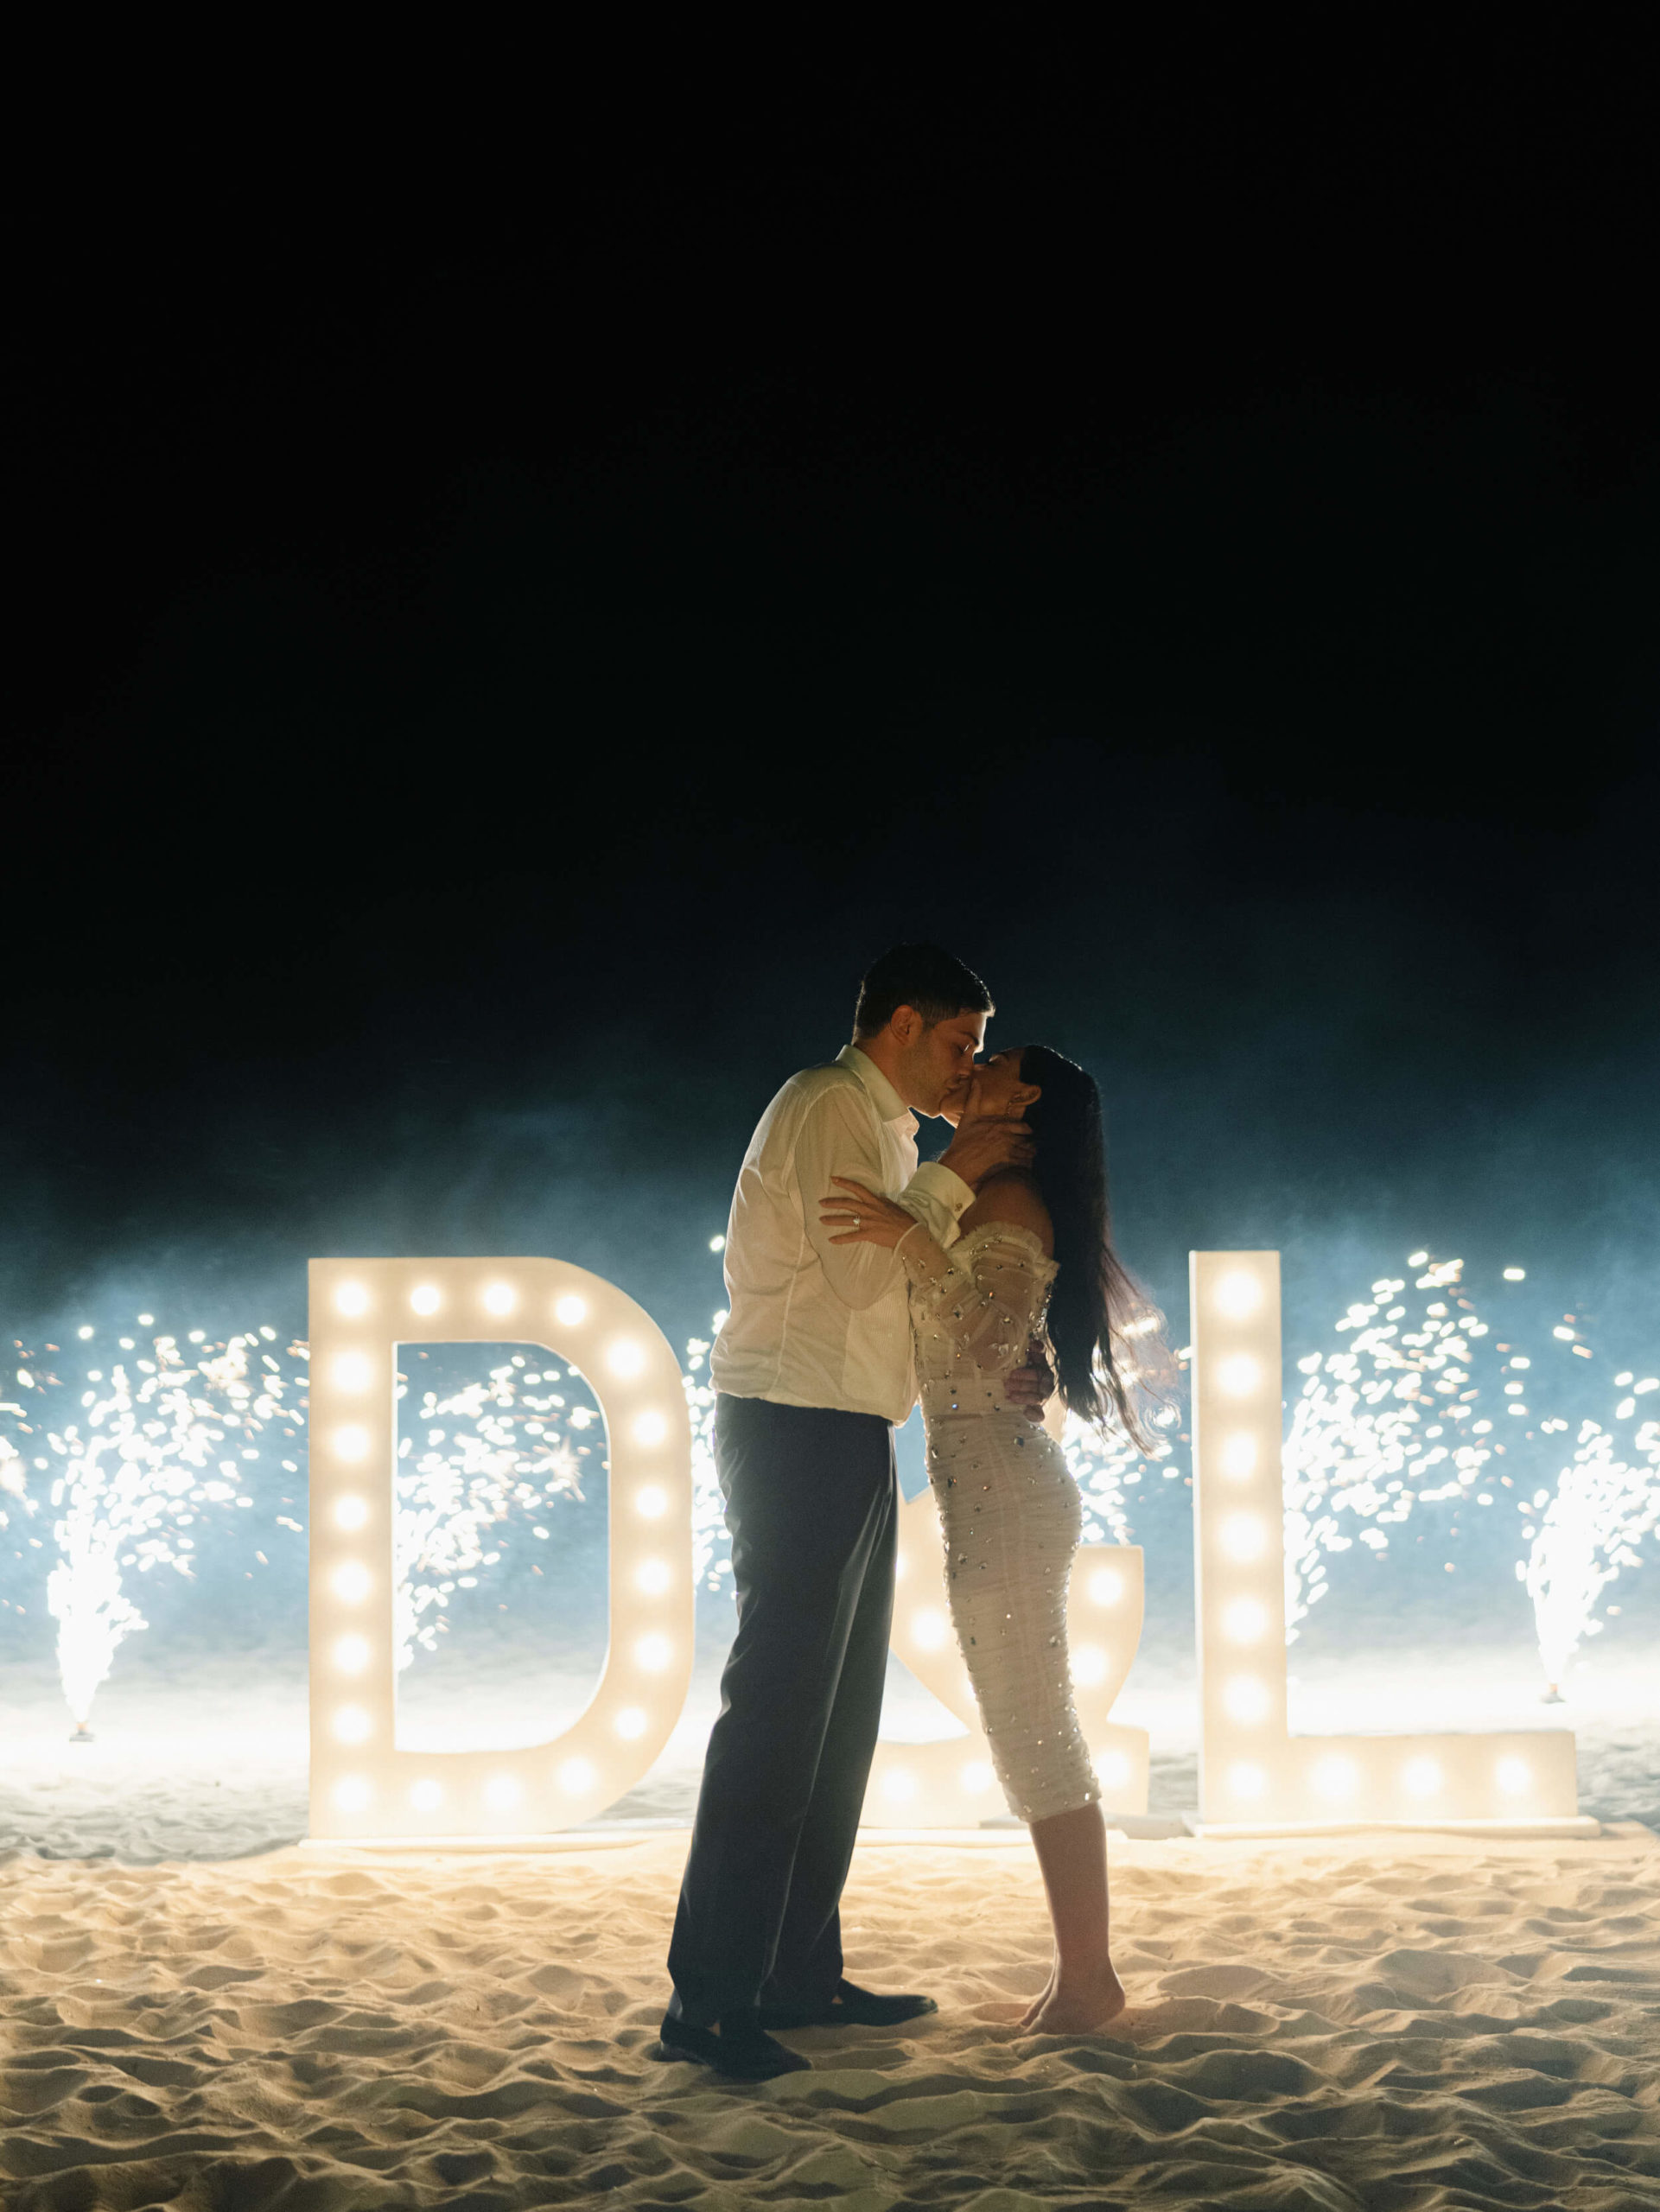 Danielle and Lucas kissing in front of lighted letters that say "D & L"